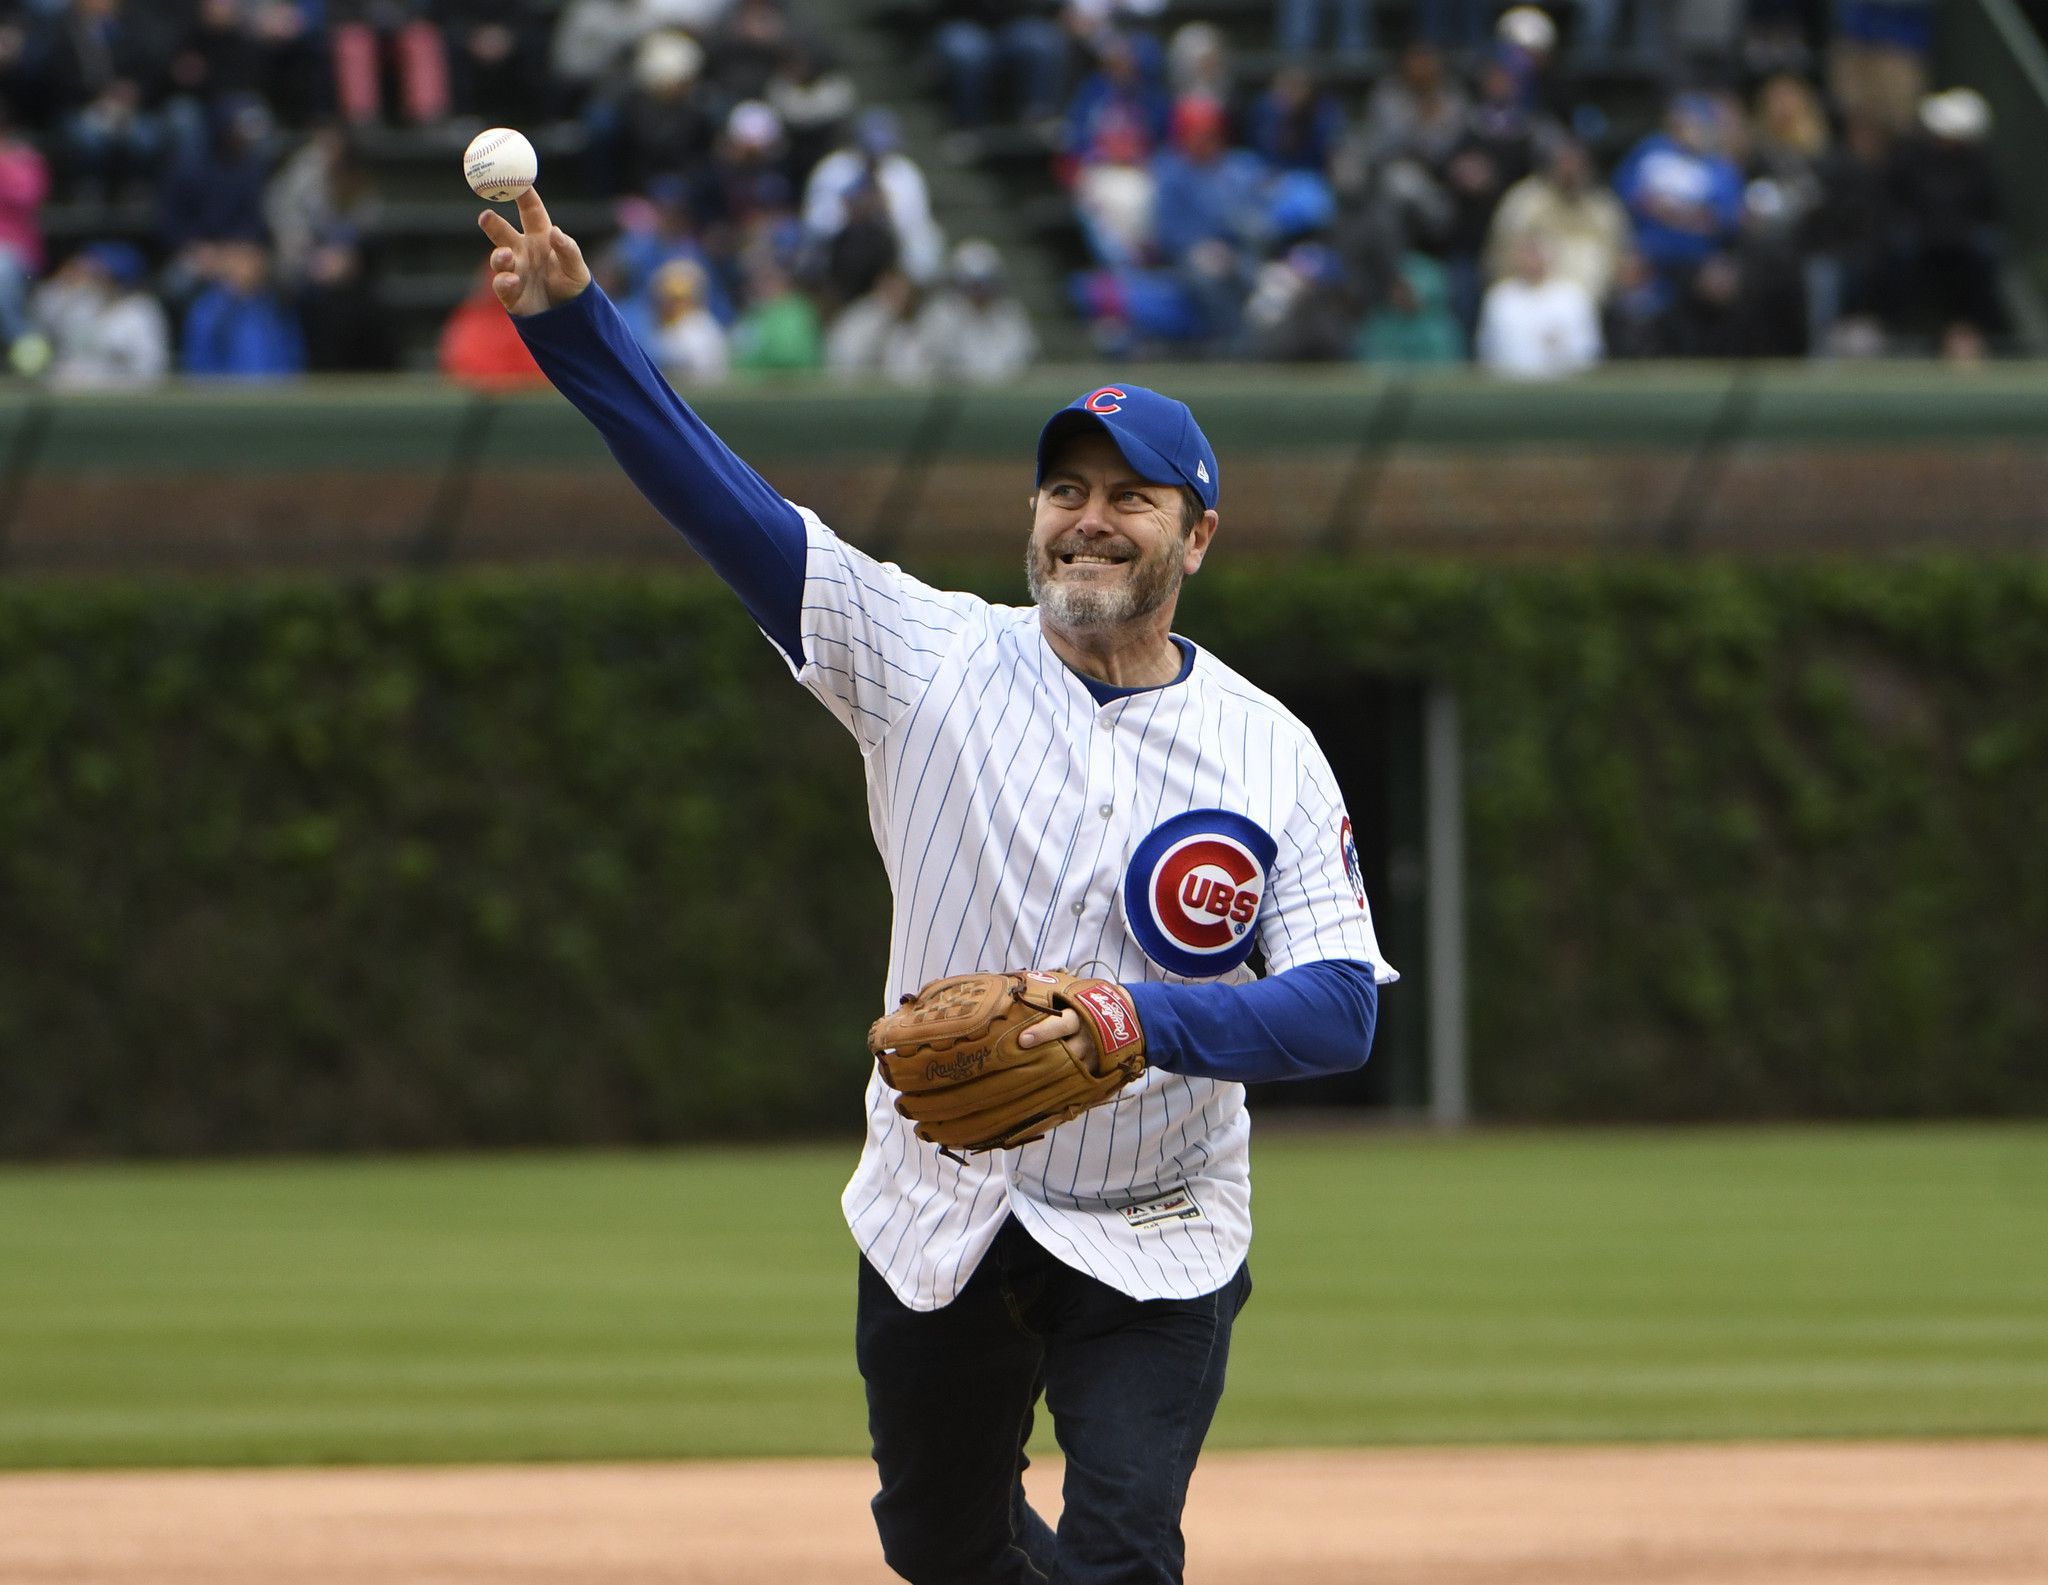 Cubs, celebrities pitch in at 8th Winter Warm-Up - City